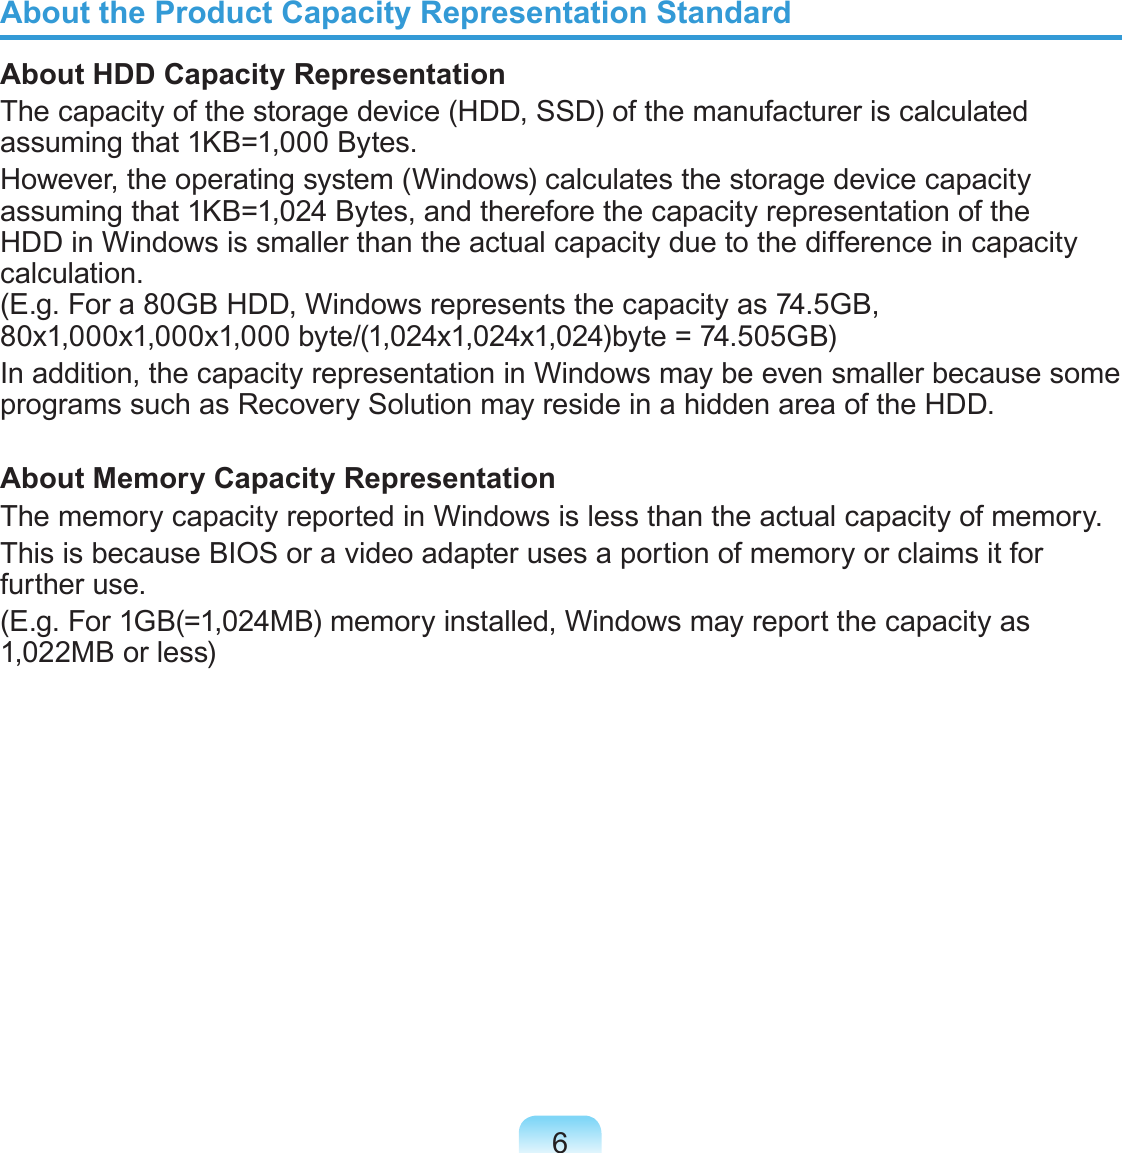 6About the Product Capacity Representation StandardAbout HDD Capacity RepresentationThe capacity of the storage device (HDD, SSD) of the manufacturer is calculated assuming that 1KB=1,000 Bytes.However, the operating system (Windows) calculates the storage device capacity assuming that 1KB=1,024 Bytes, and therefore the capacity representation of the HDD in Windows is smaller than the actual capacity due to the difference in capacity calculation.  (E.g. For a 80GB HDD, Windows represents the capacity as 74.5GB, 80x1,000x1,000x1,000 byte/(1,024x1,024x1,024)byte = 74.505GB)In addition, the capacity representation in Windows may be even smaller because some programs such as Recovery Solution may reside in a hidden area of the HDD.About Memory Capacity RepresentationThe memory capacity reported in Windows is less than the actual capacity of memory.This is because BIOS or a video adapter uses a portion of memory or claims it for further use.(E.g. For 1GB(=1,024MB) memory installed, Windows may report the capacity as 1,022MB or less)